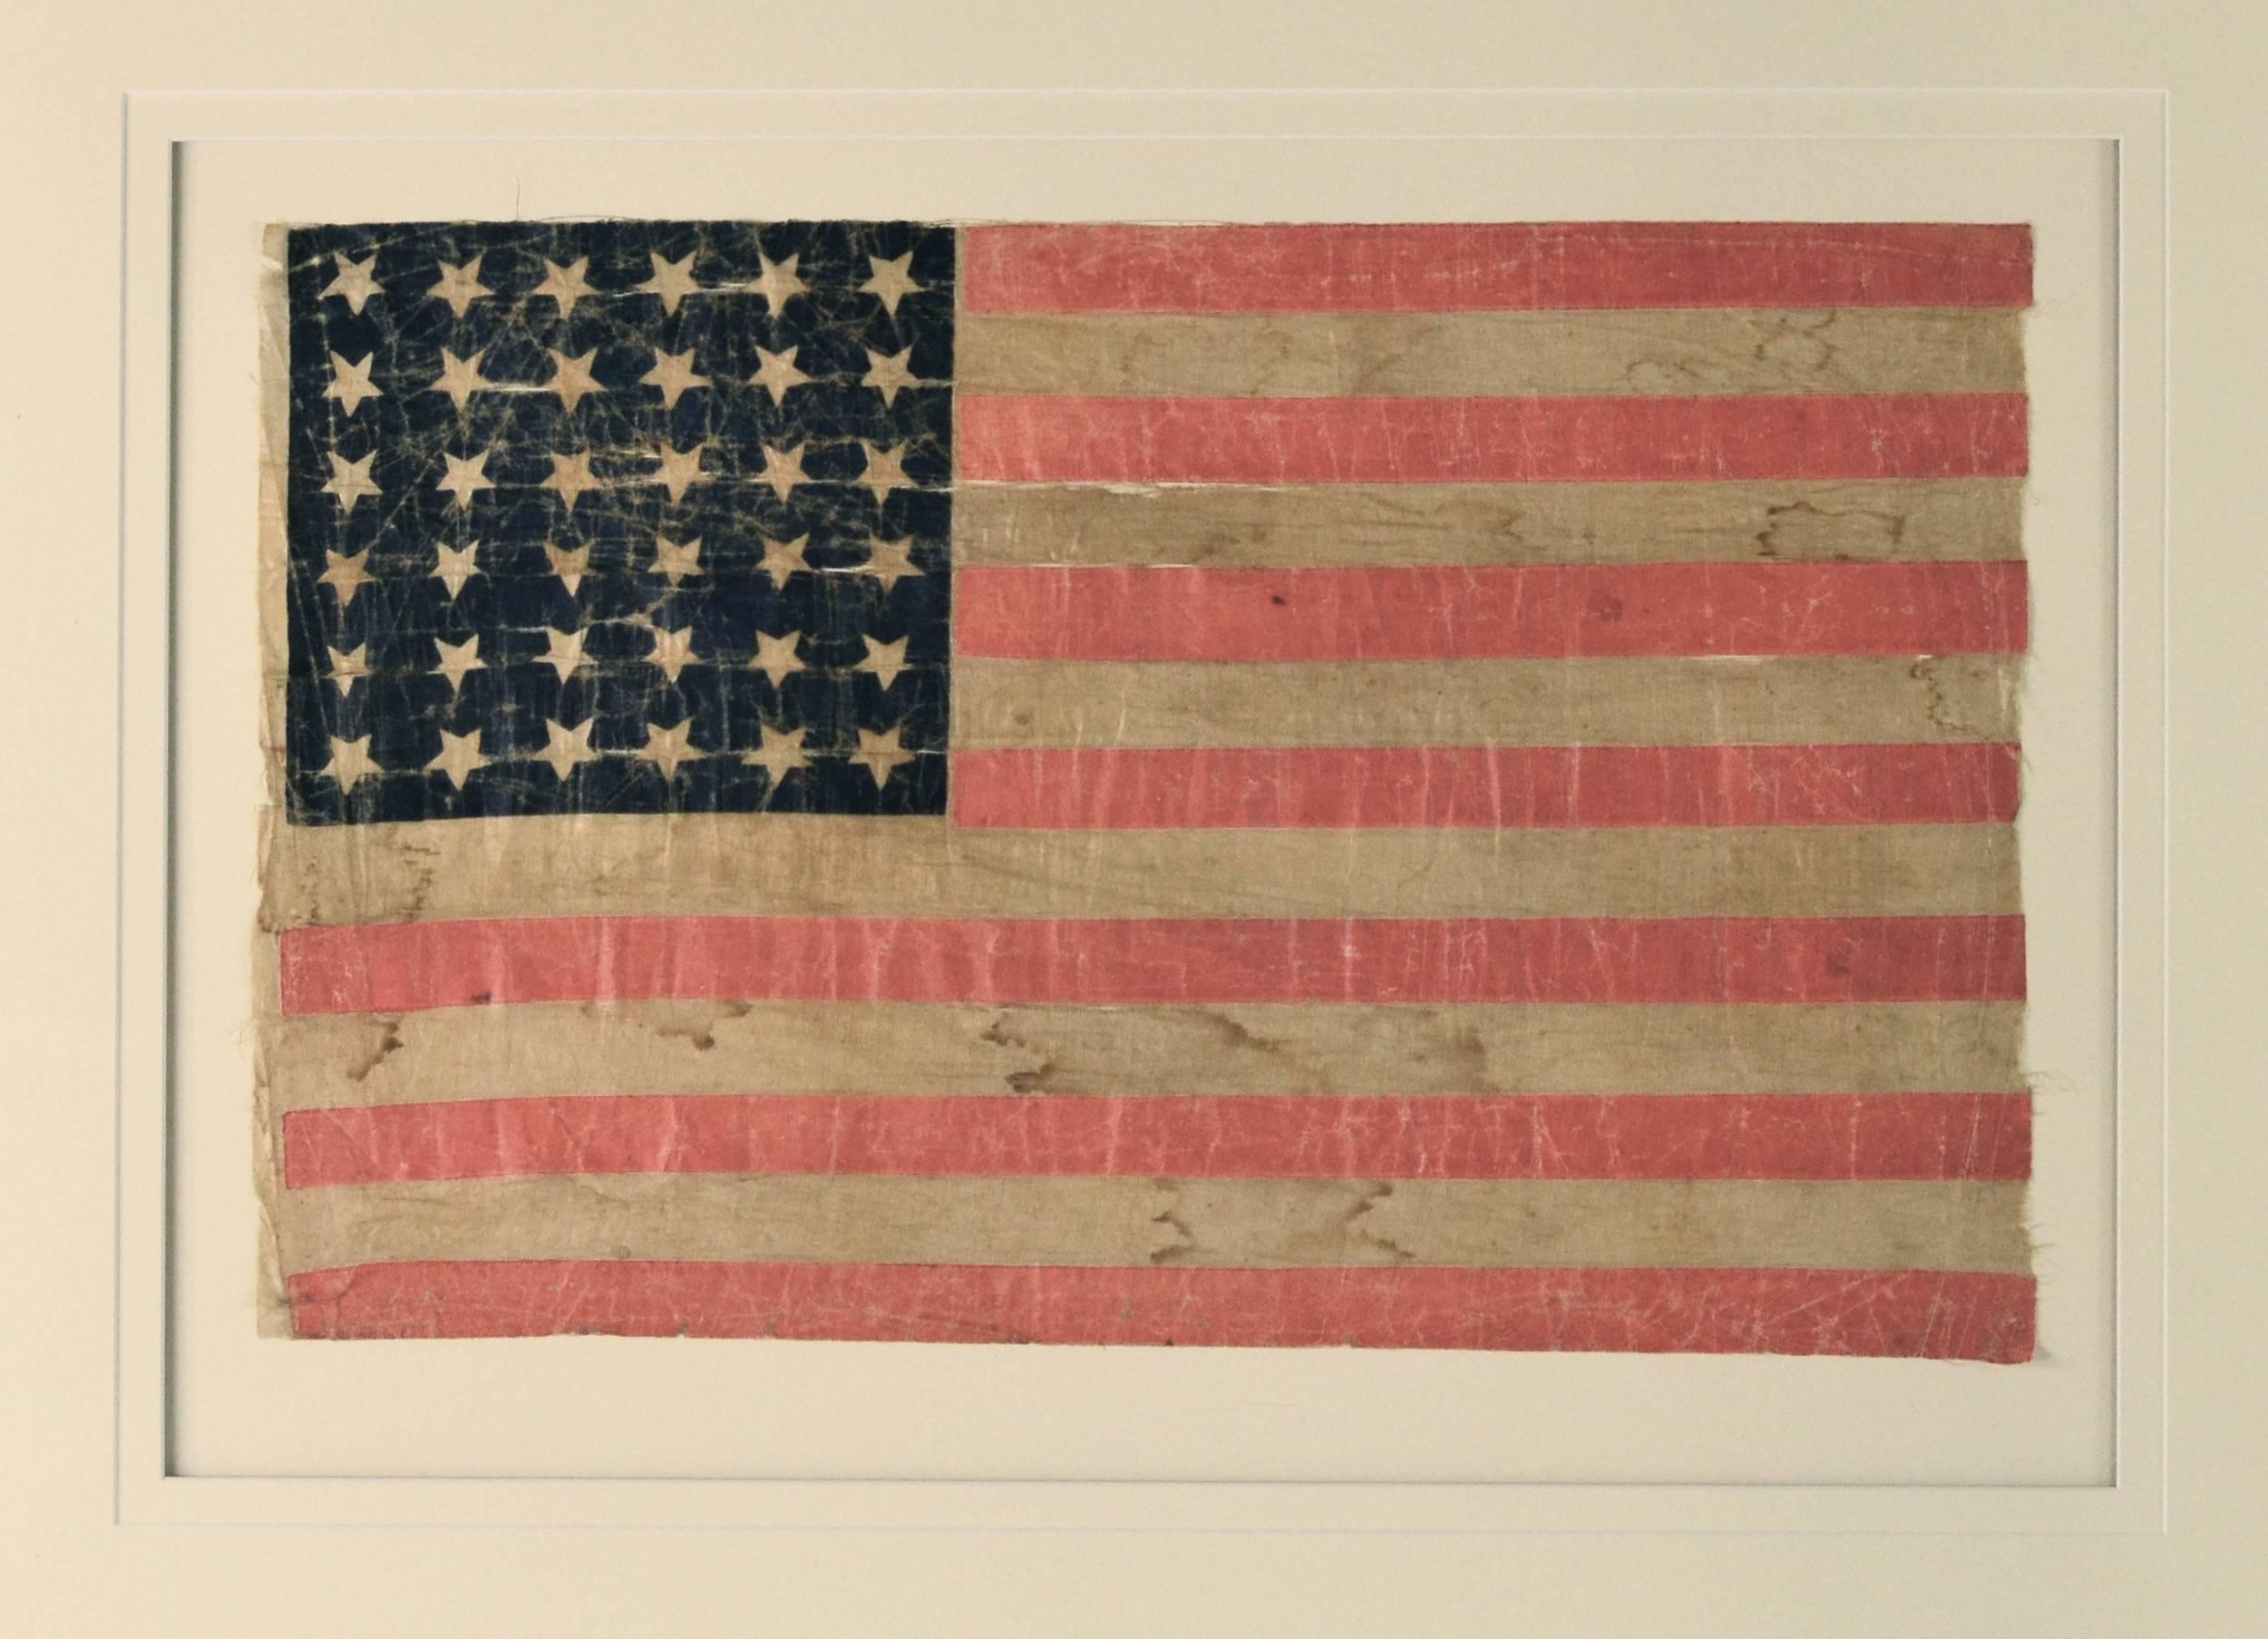 Authentic antique 36 star flag made of starched glazed fabric. Made during the Civil War, circa 1864. Civil War flags are fairly rare and highly collectable.
Conservation framing with UV acrylic.
                          